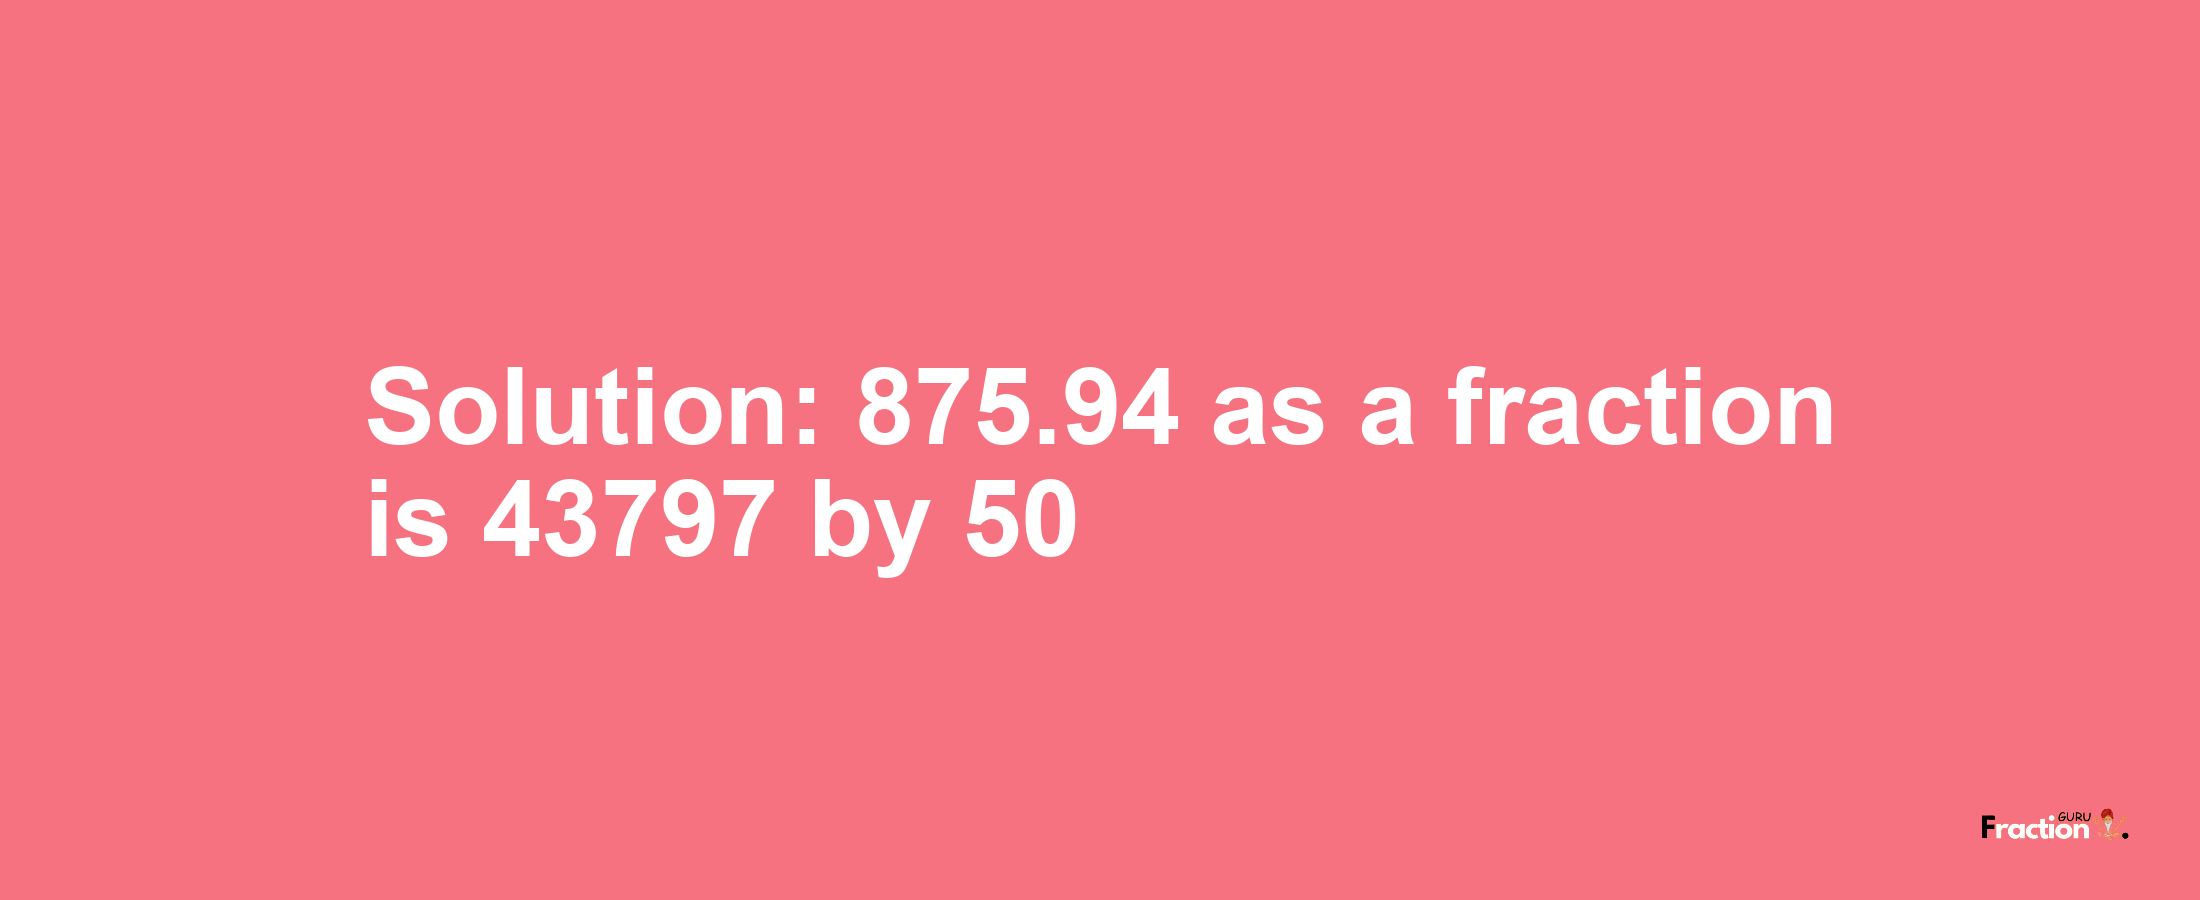 Solution:875.94 as a fraction is 43797/50